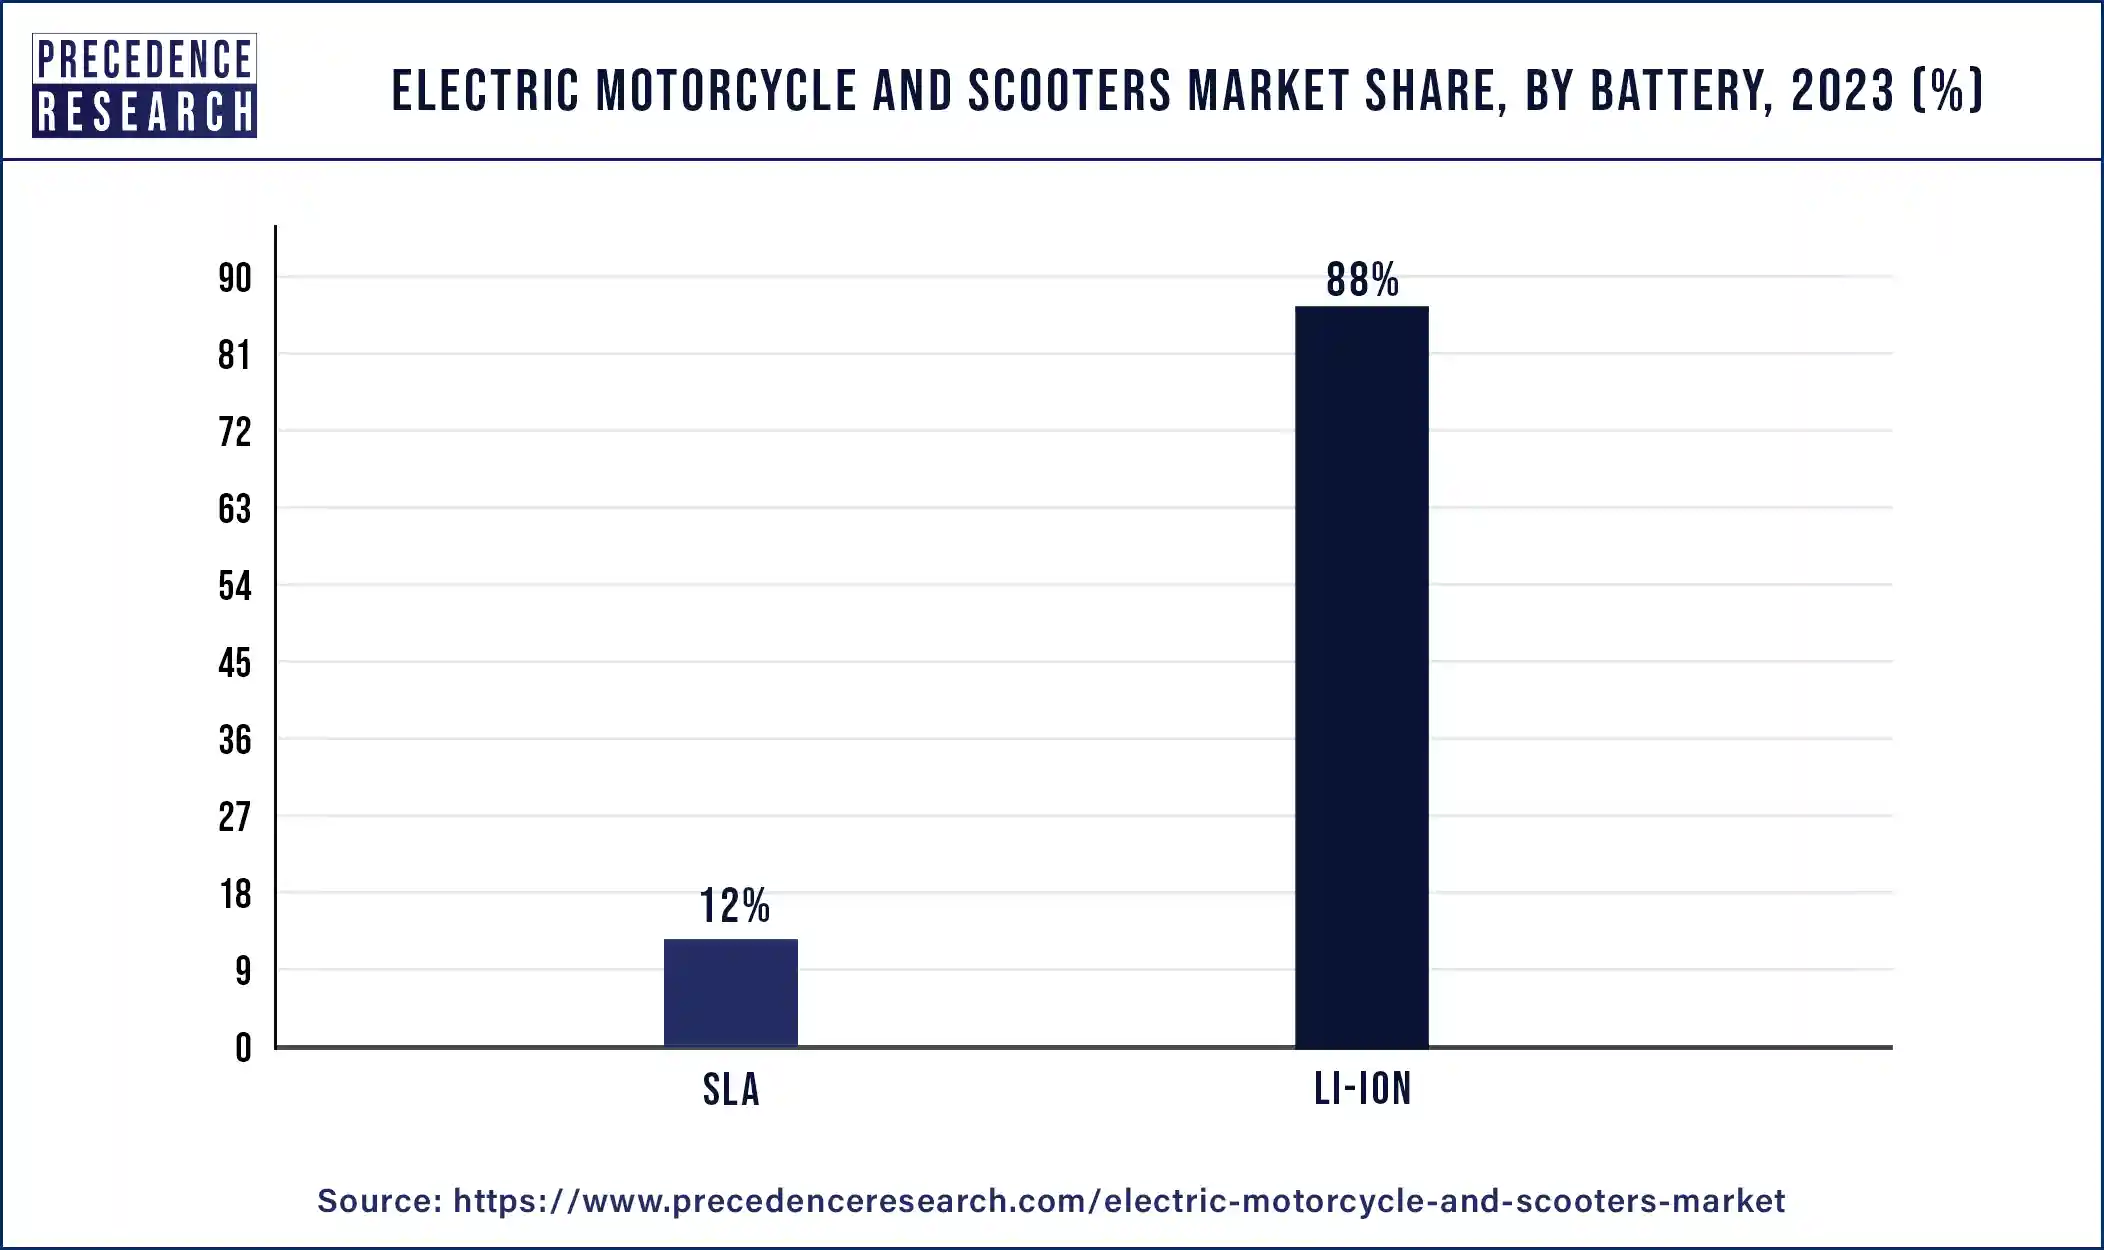 Electric Motorcycle and Scooters Market Share, By Battery, 2023 (%)